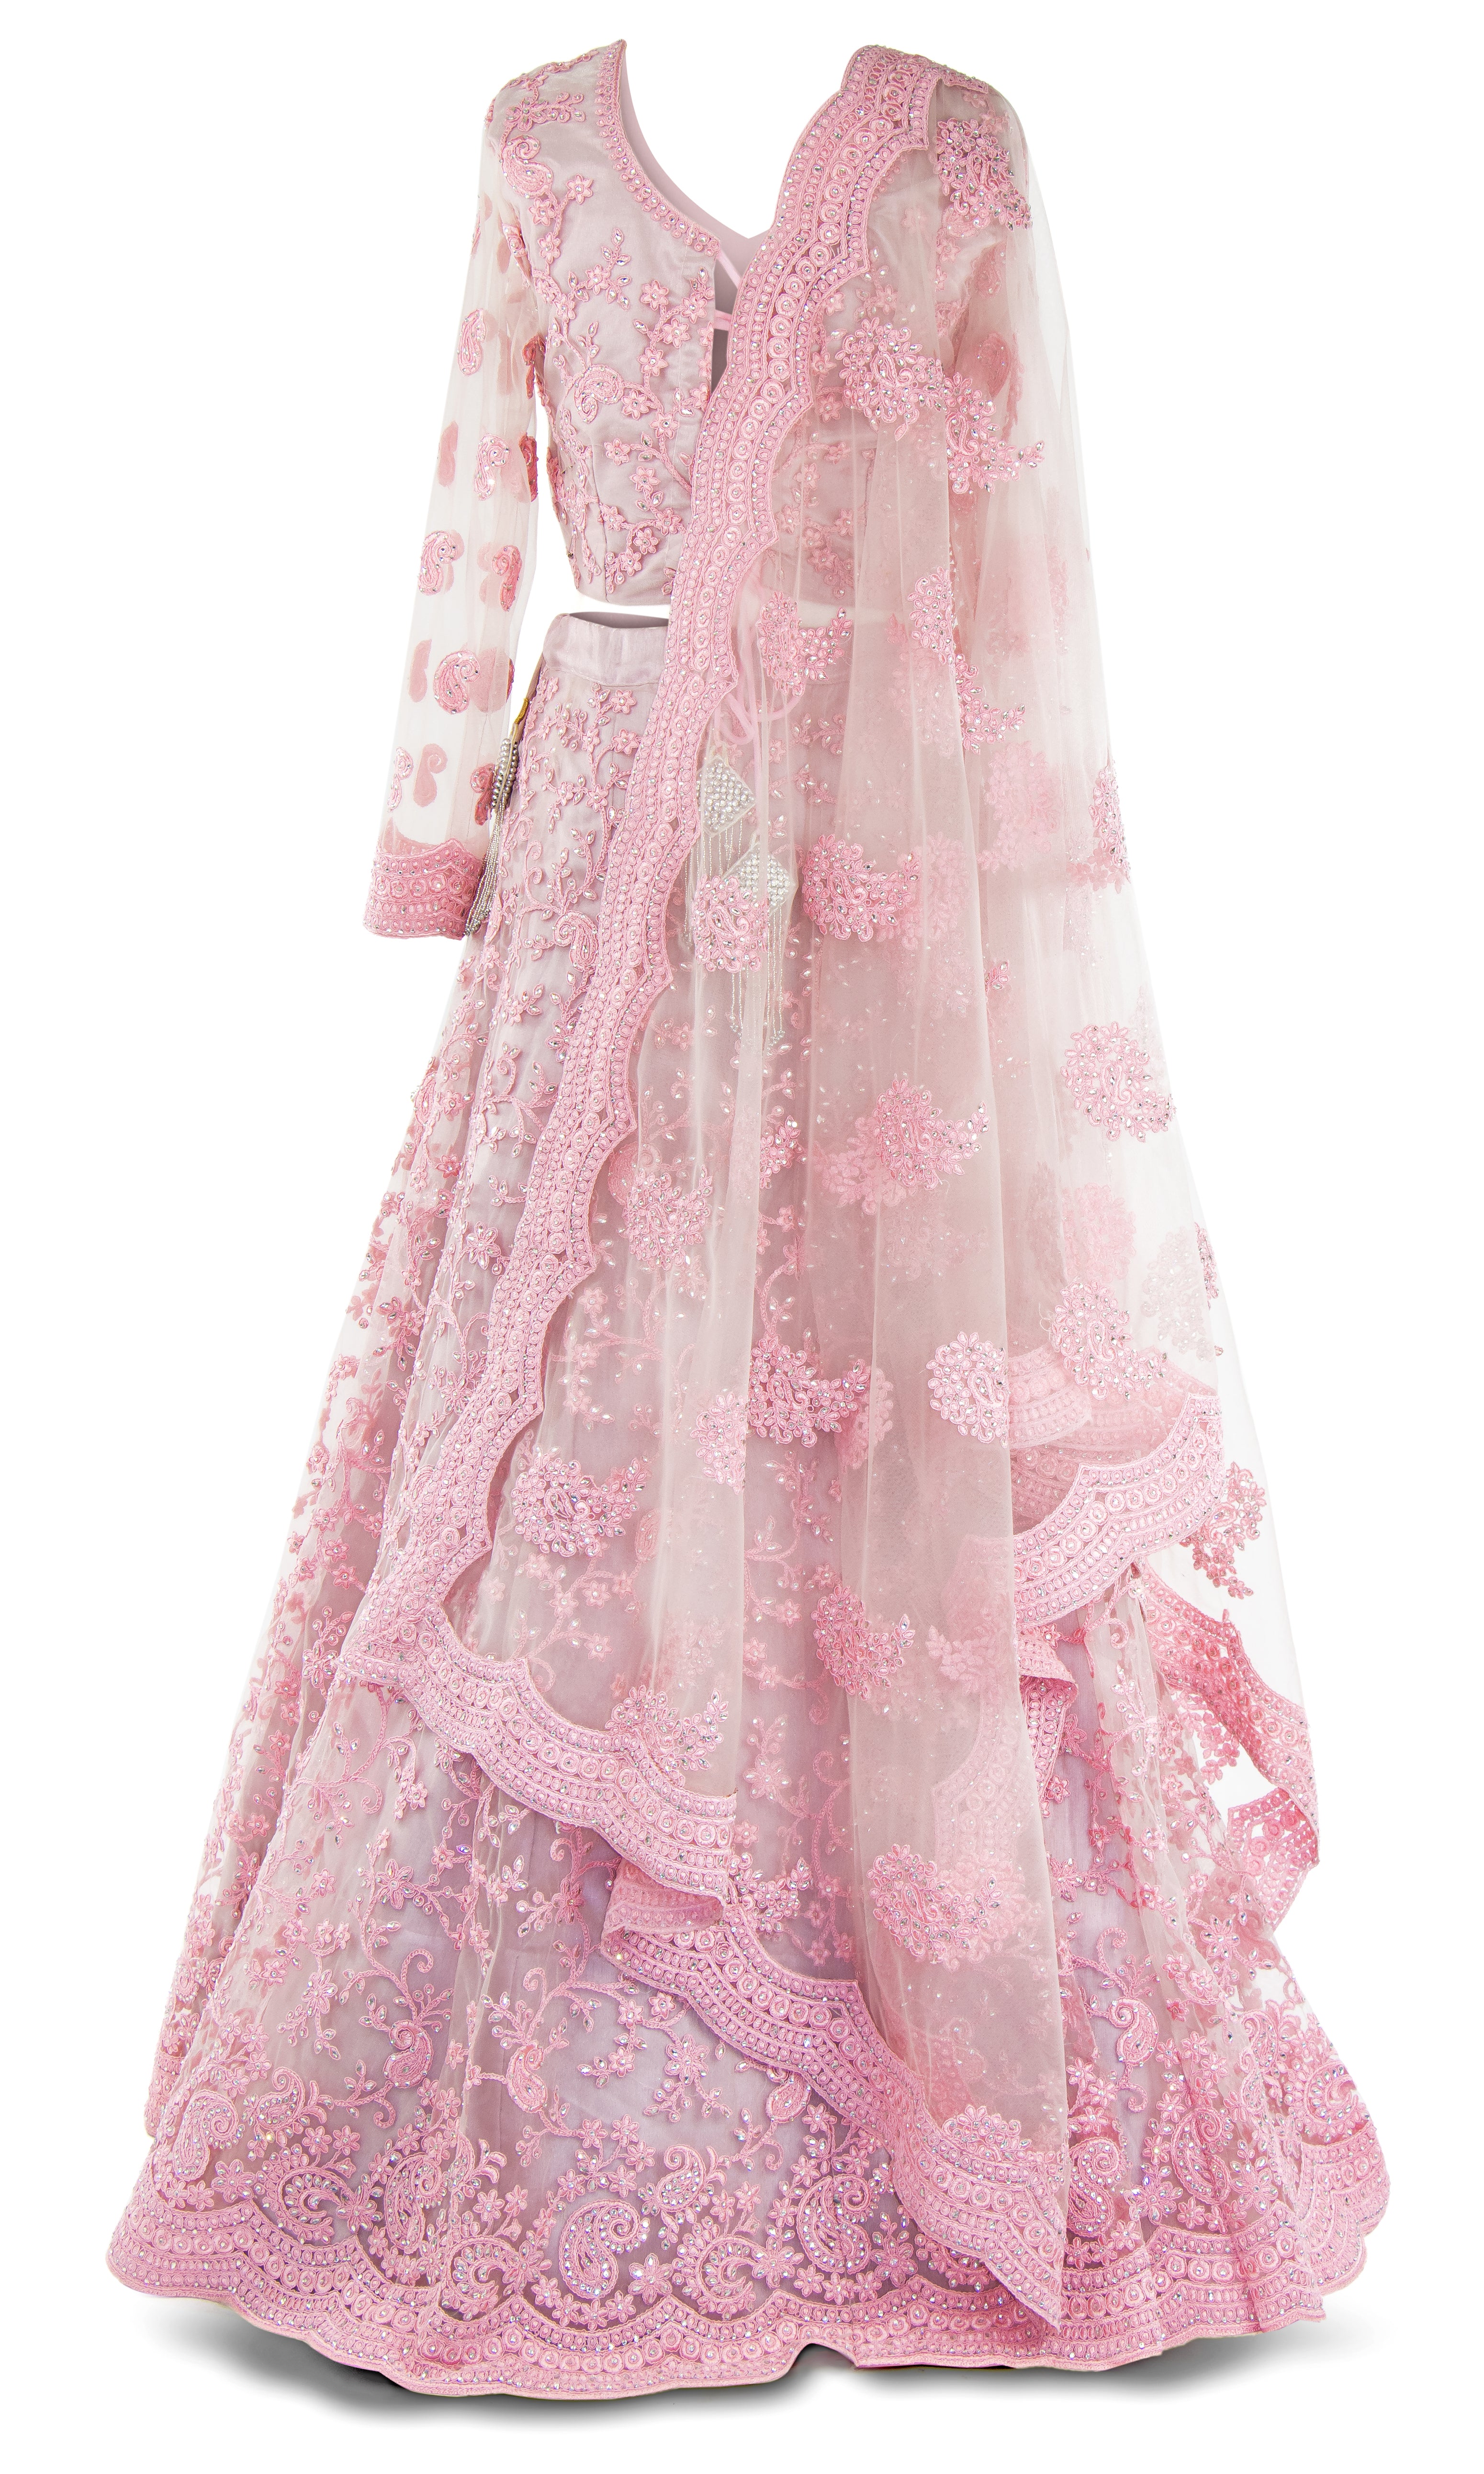 Satin silk top with net sleeves embroidered with paisley & pink florals shimmering crystals. Paired with A- line skirt.